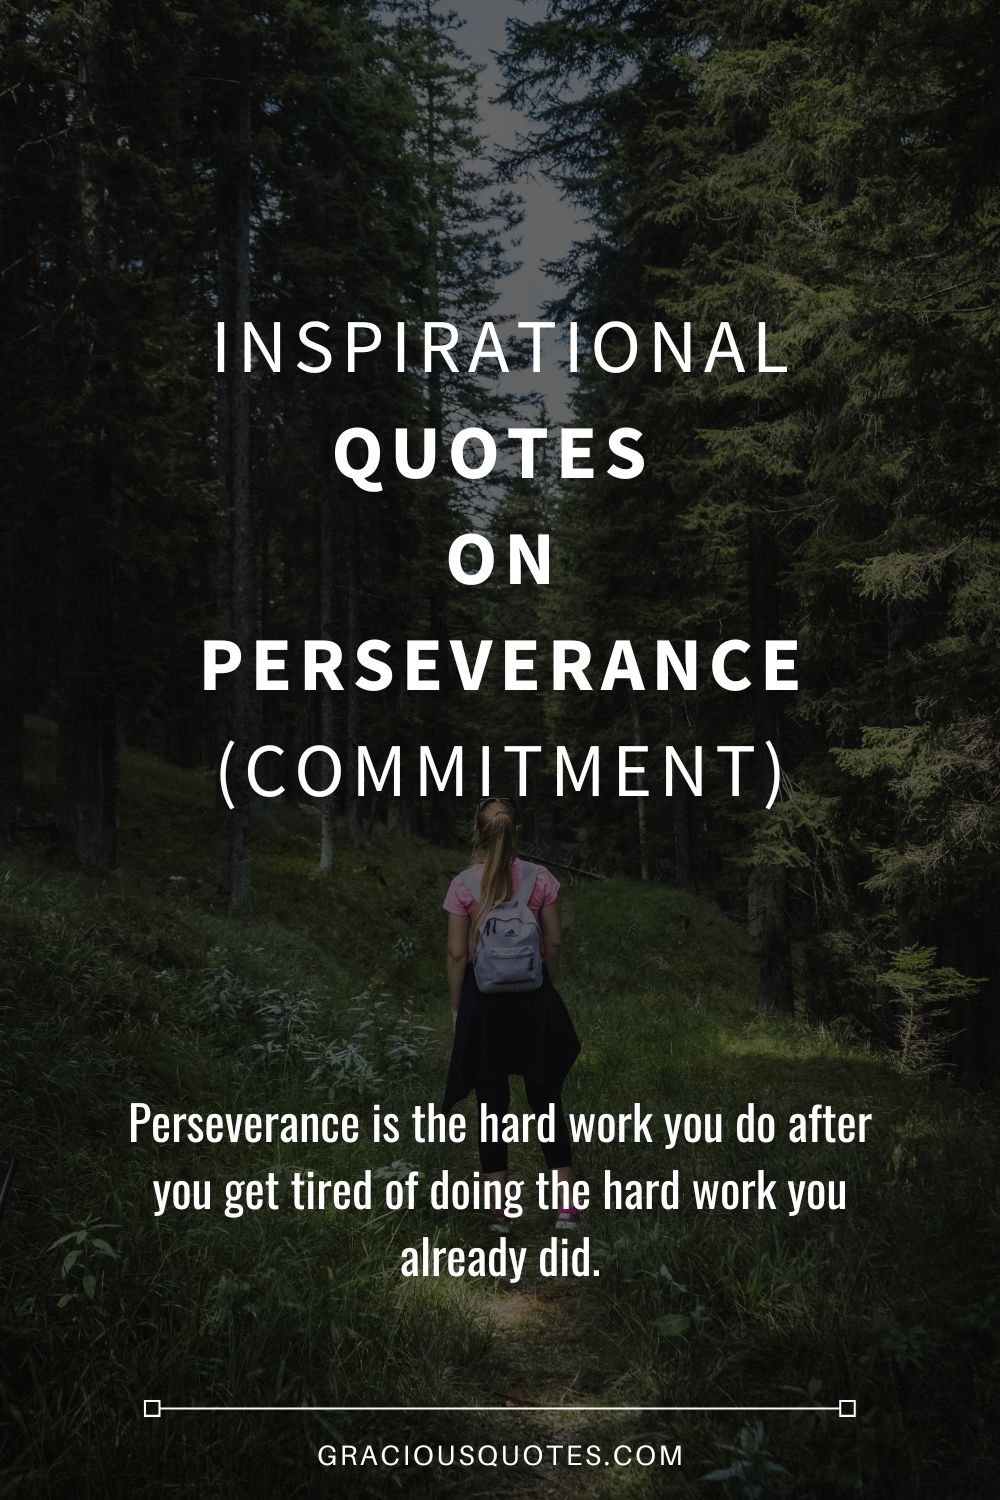 Inspirational Quotes on Perseverance (COMMITMENT) - Gracious Quotes